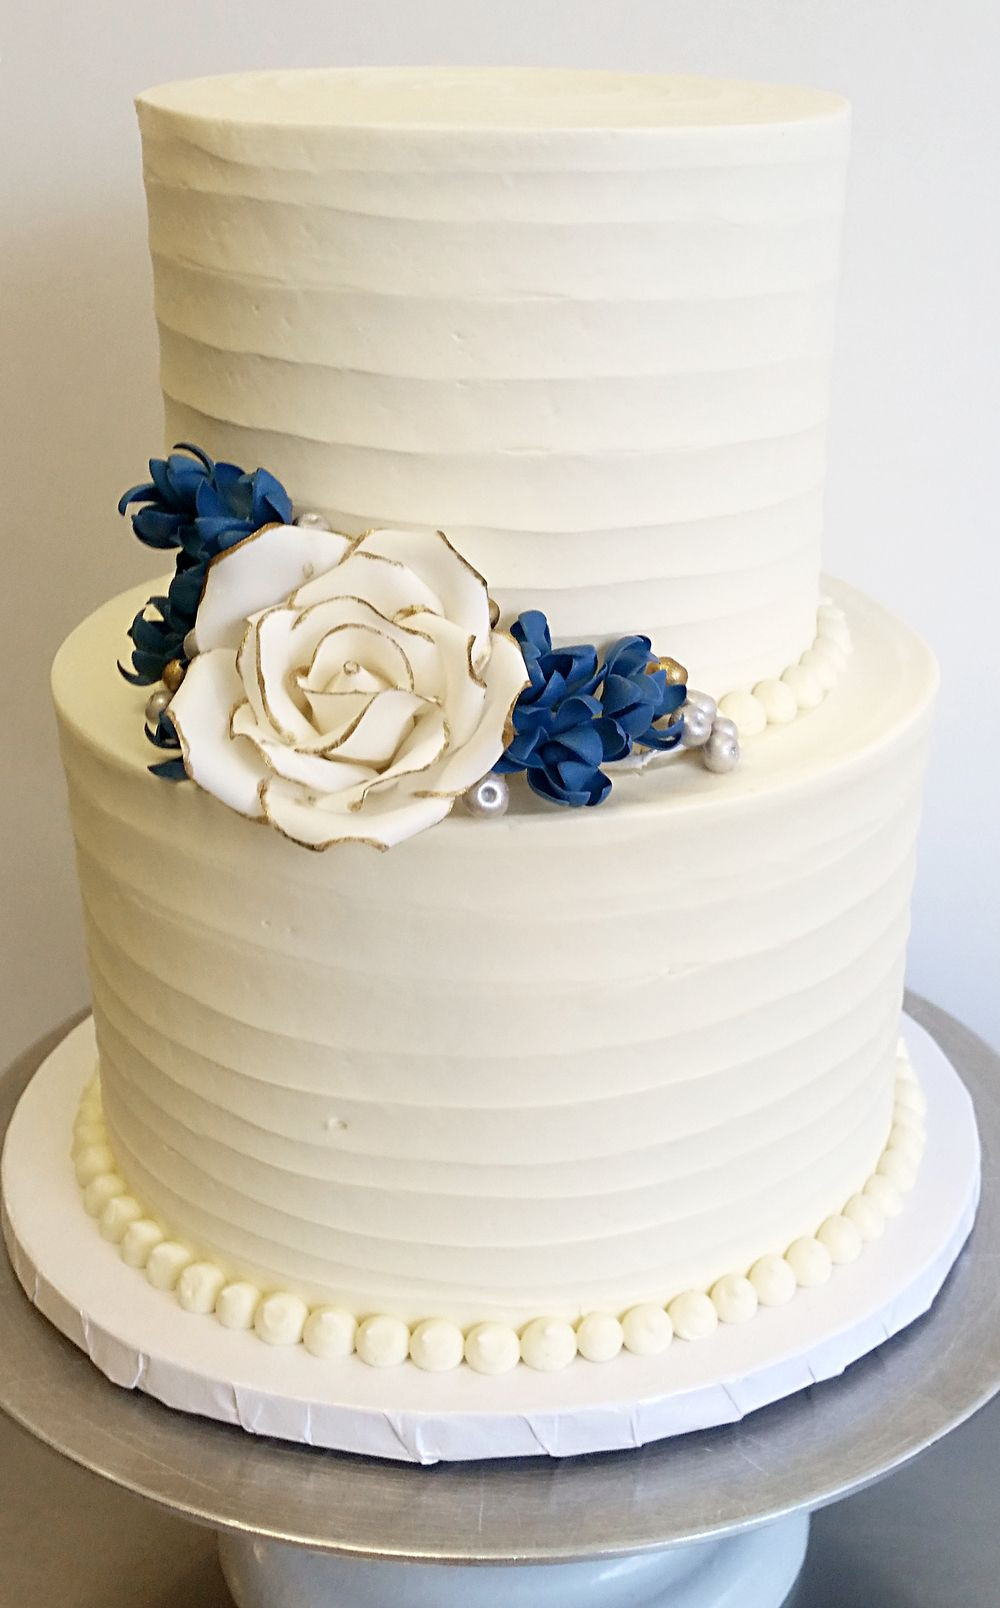 2 Tier Wedding Cakes Buttercream
 Textured buttercream with gum paste rose and blossoms 2